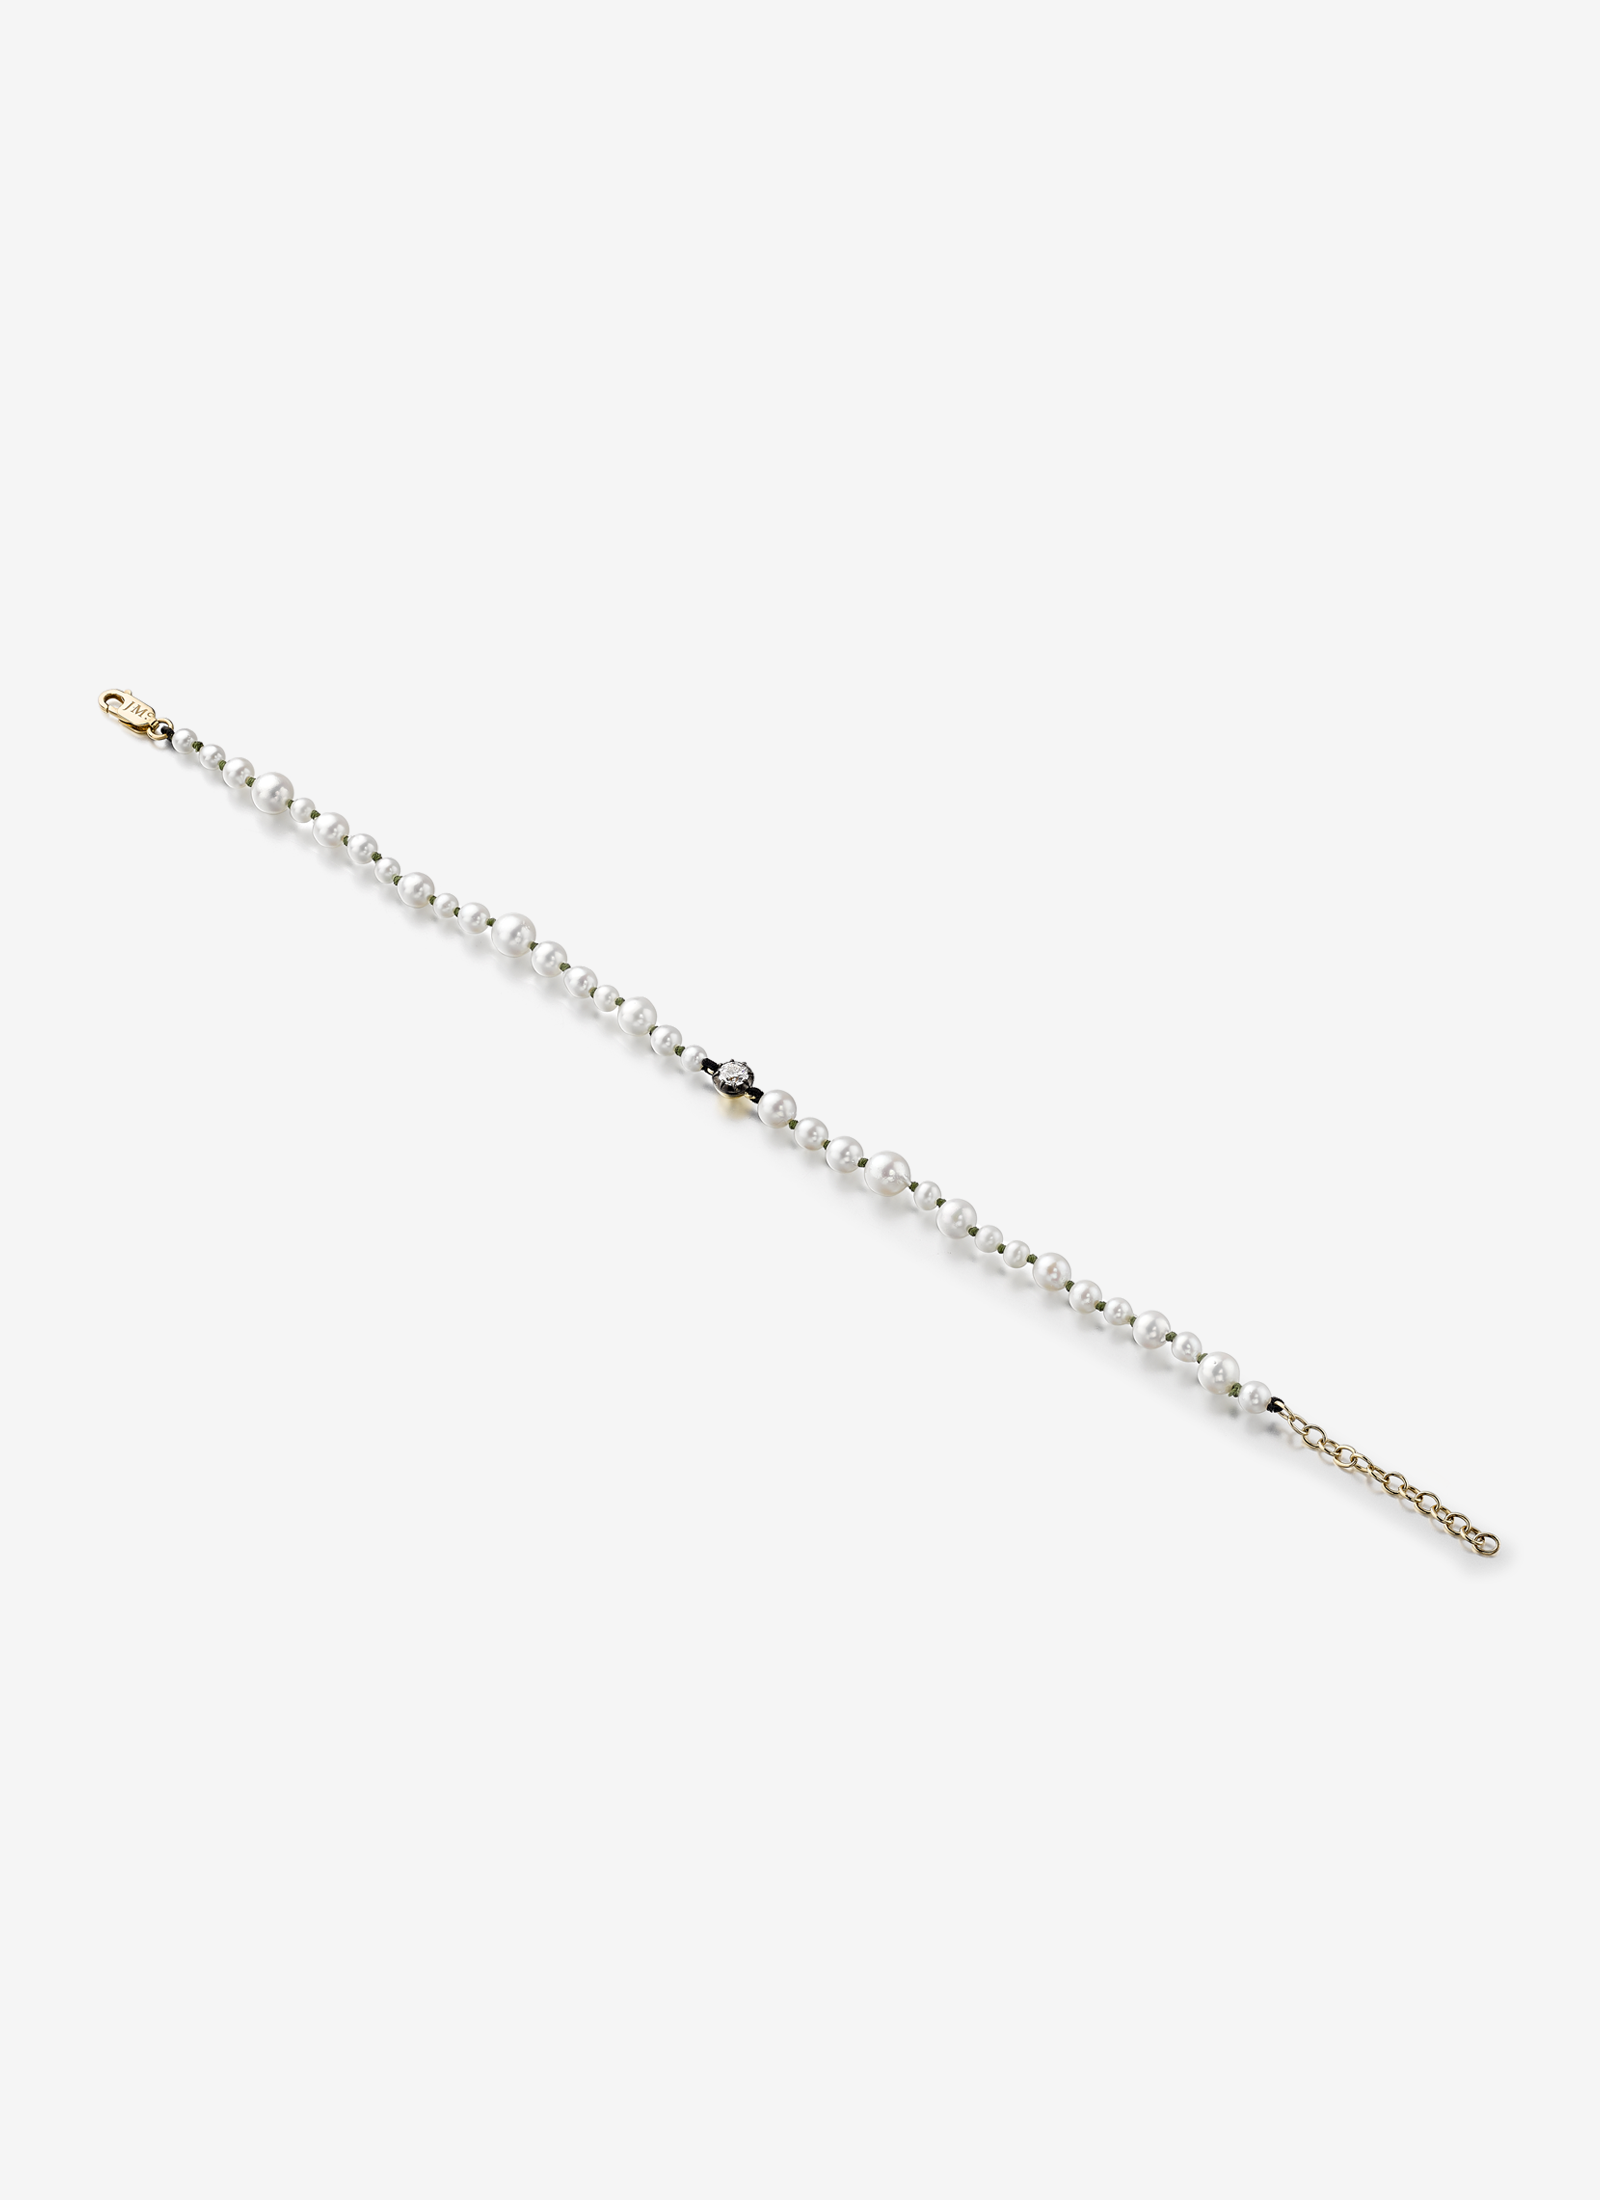 Beaches Pearl Anklet - 18K Gold Anklet with 0.40ct diamond & pearls